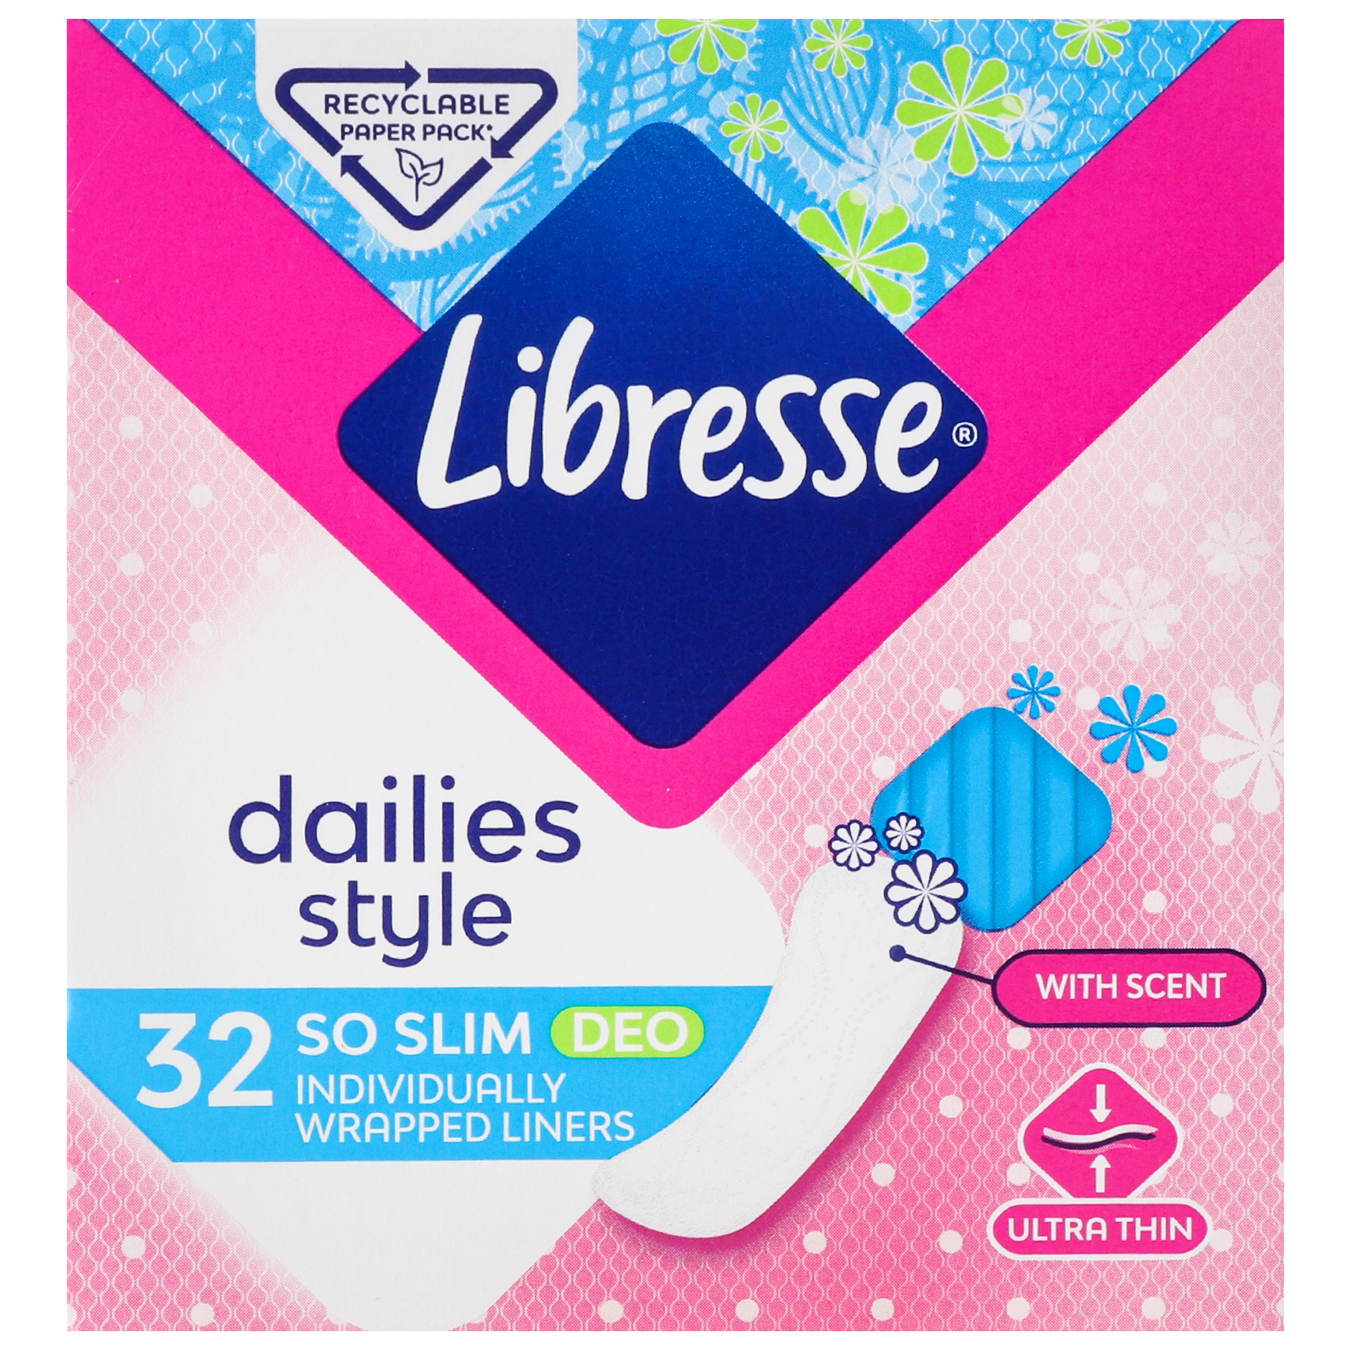 Libresse Daily Fresh Normal Deo hygienic pads 32pcs